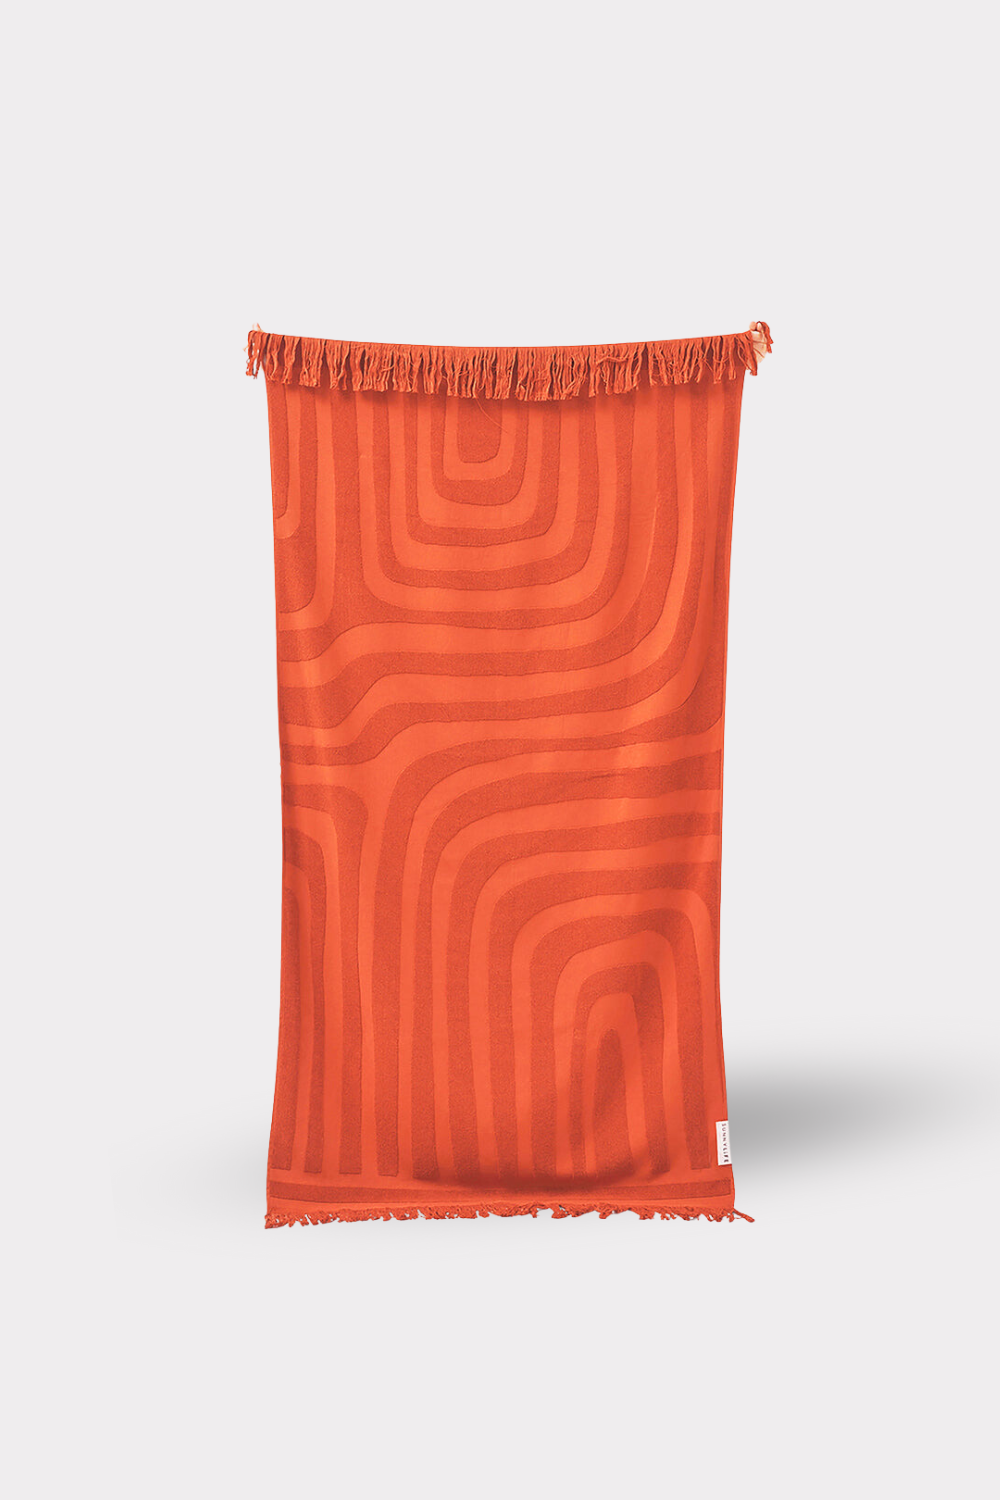 Sunnylife luxe beach towel in terracotta red orange with abstract detail, a summer pop up exclusive online only at Koy Resort.